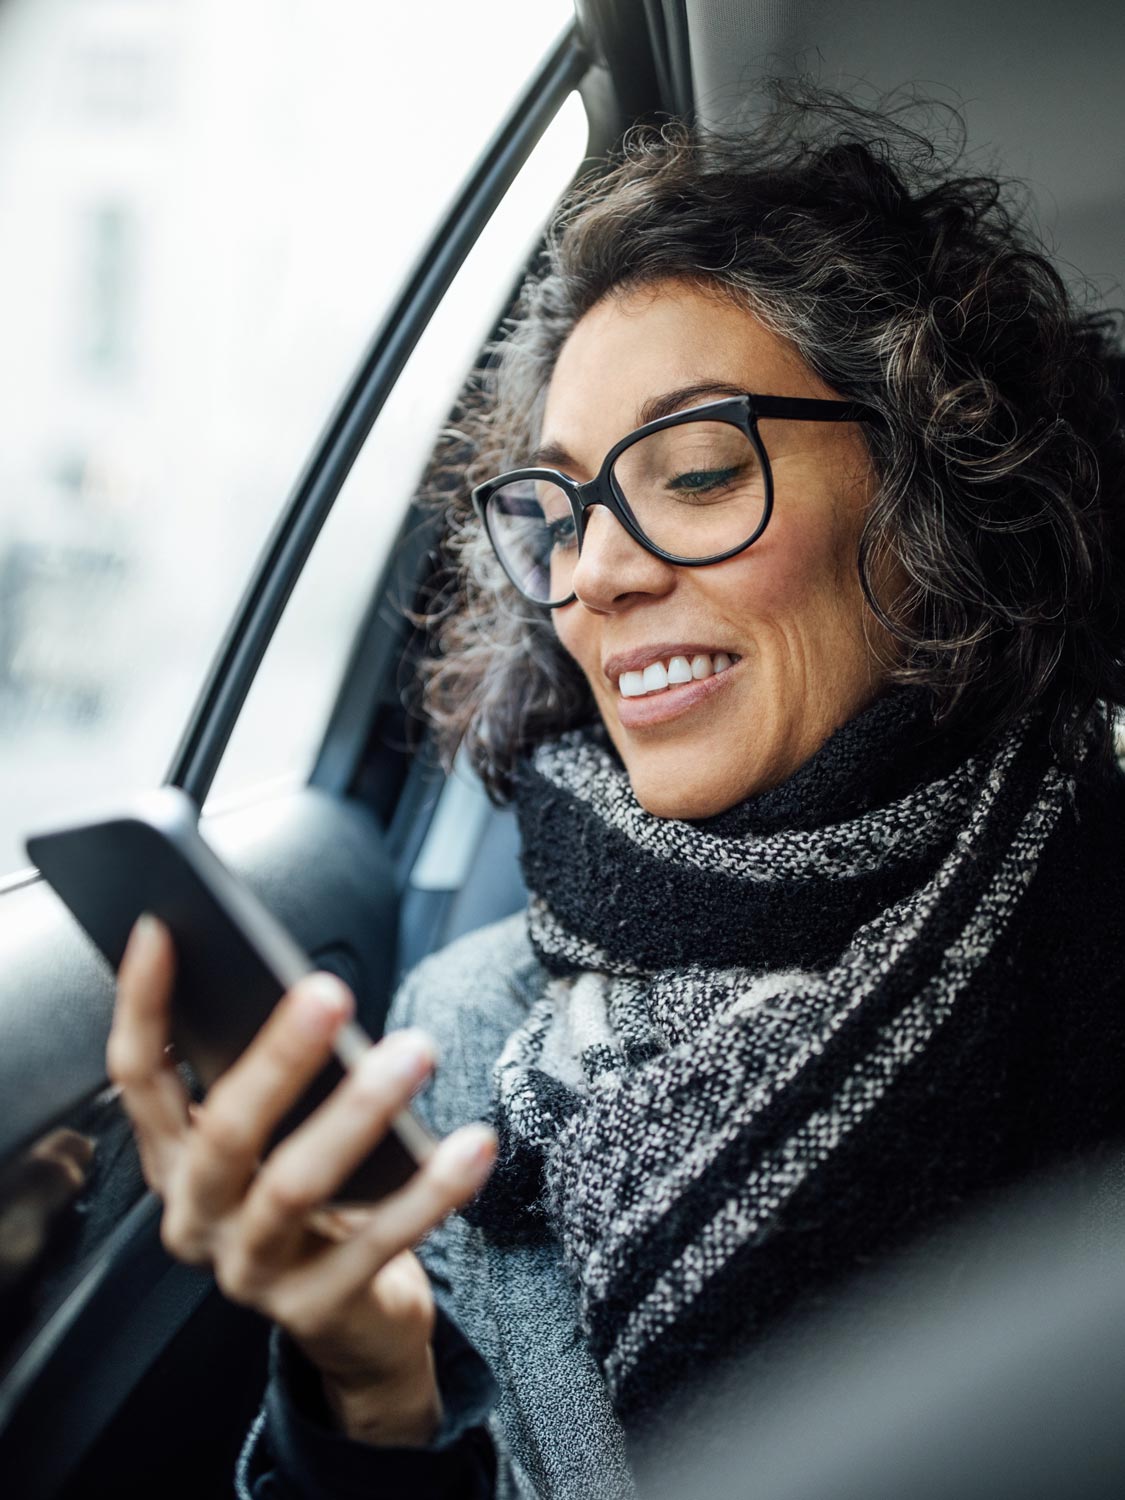 vertical-tab-mature-woman-phone-car-GettyImages-1129377239